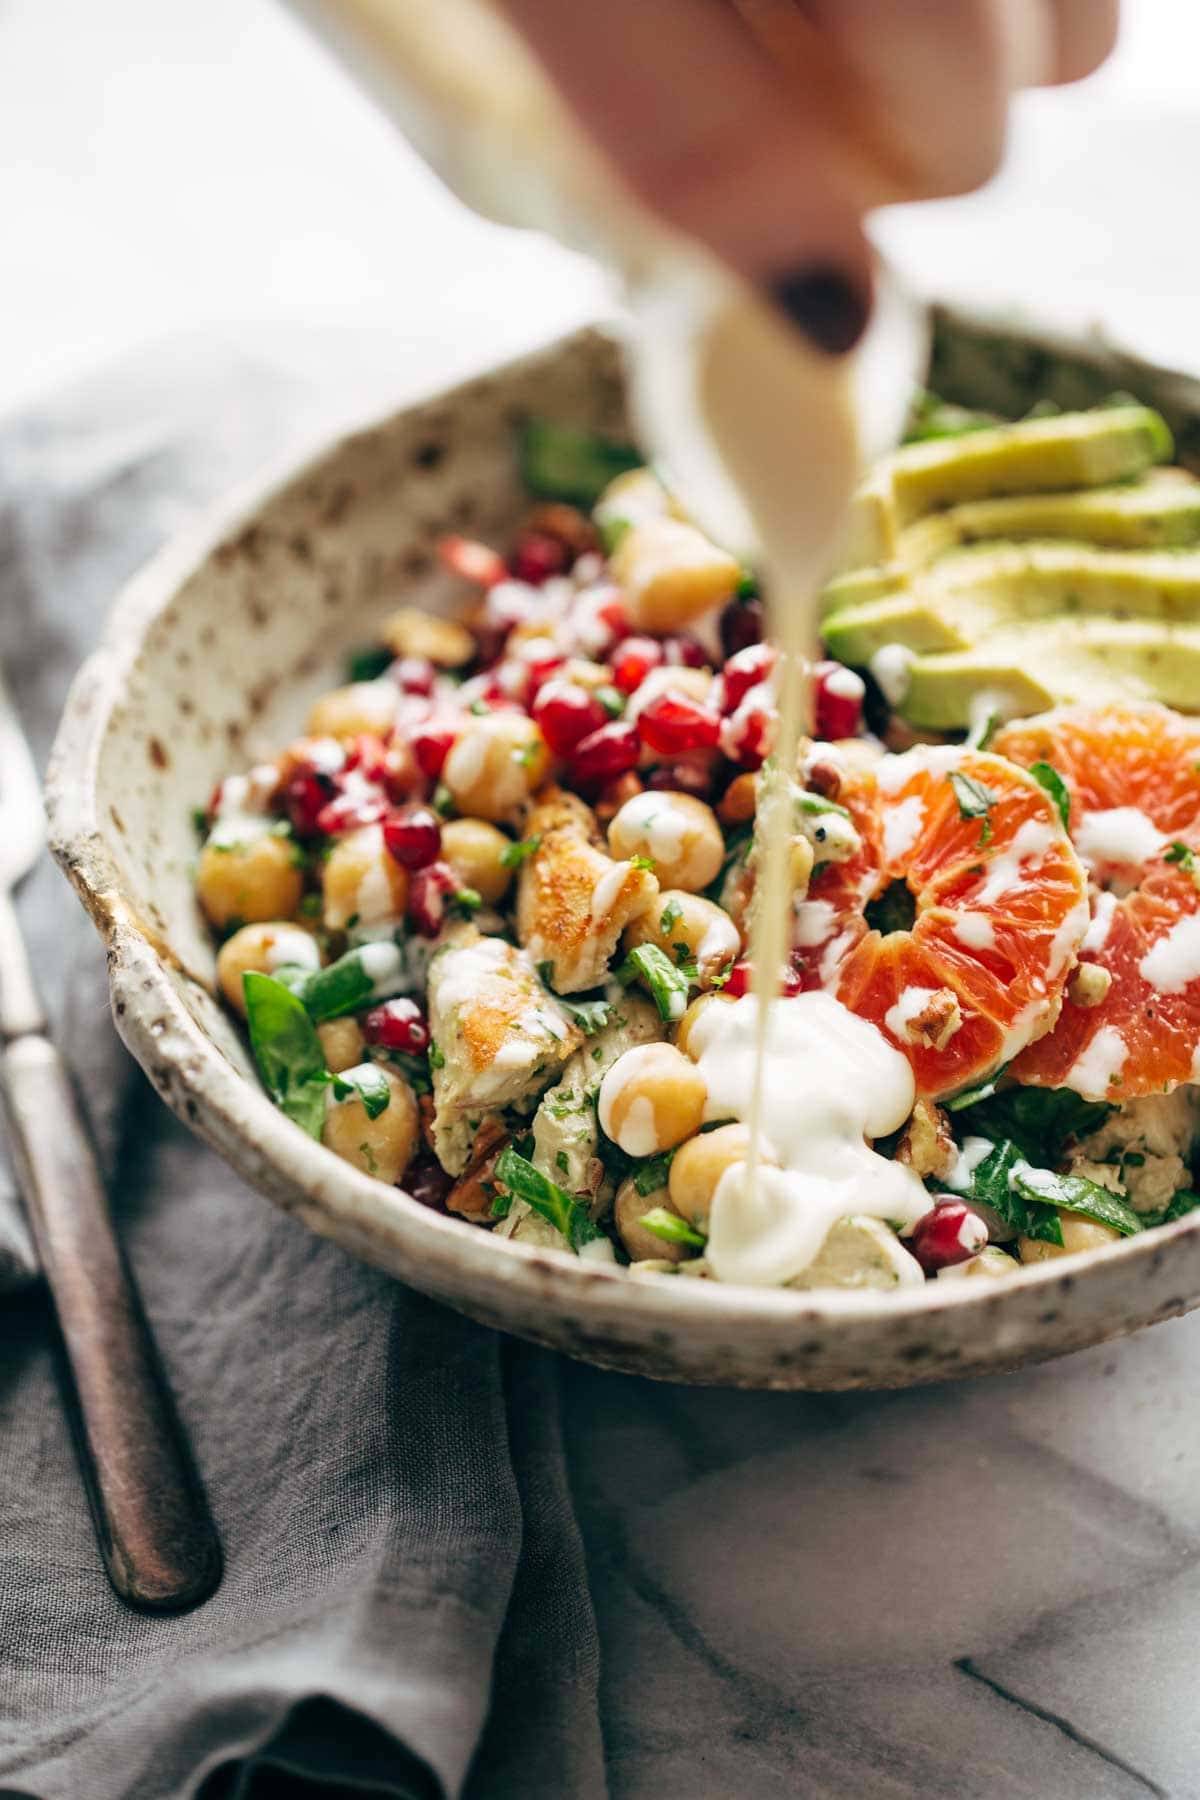 Winter Spa Salad with Lemon Chicken! Loaded with chickpeas, spinach, pomegranates, Cara Cara oranges, avocado, shallots, herbs, dressing, and lemon chicken. | pinchofyum.com